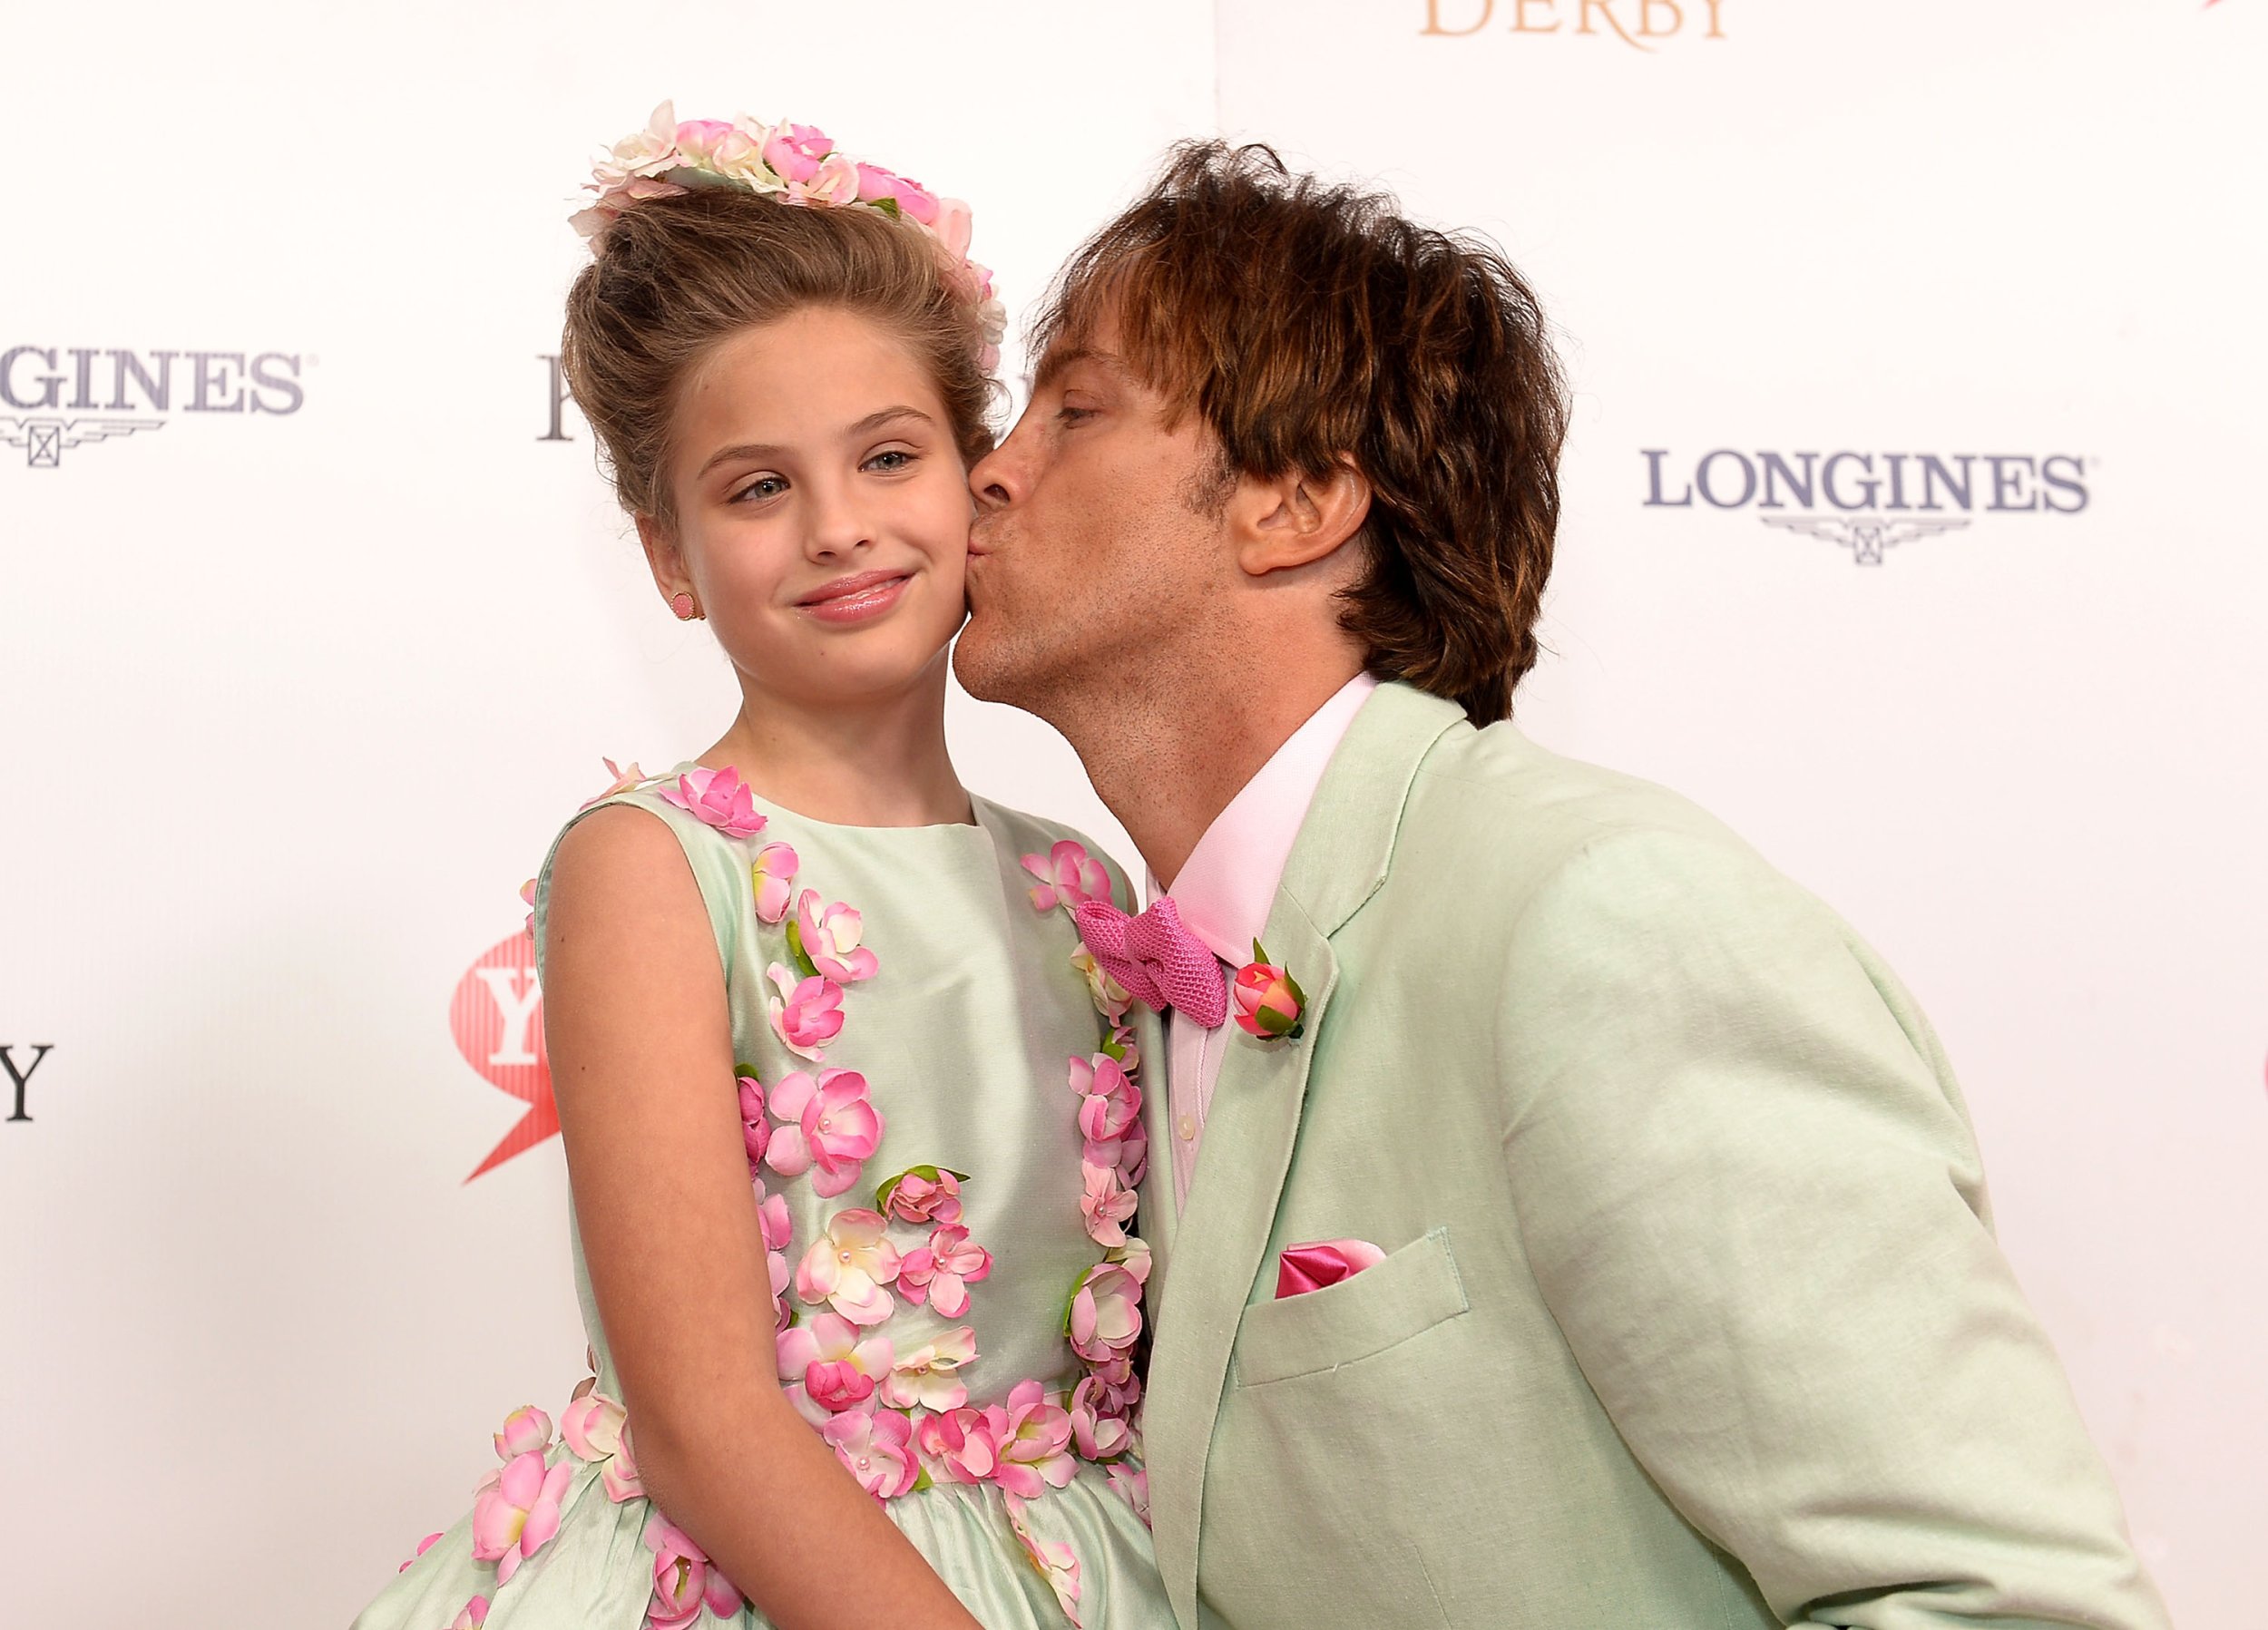 Anna Nicole Smiths Daughter Dannielynn Wears Matching Outfit With Dad Larry Birkhead At 2016